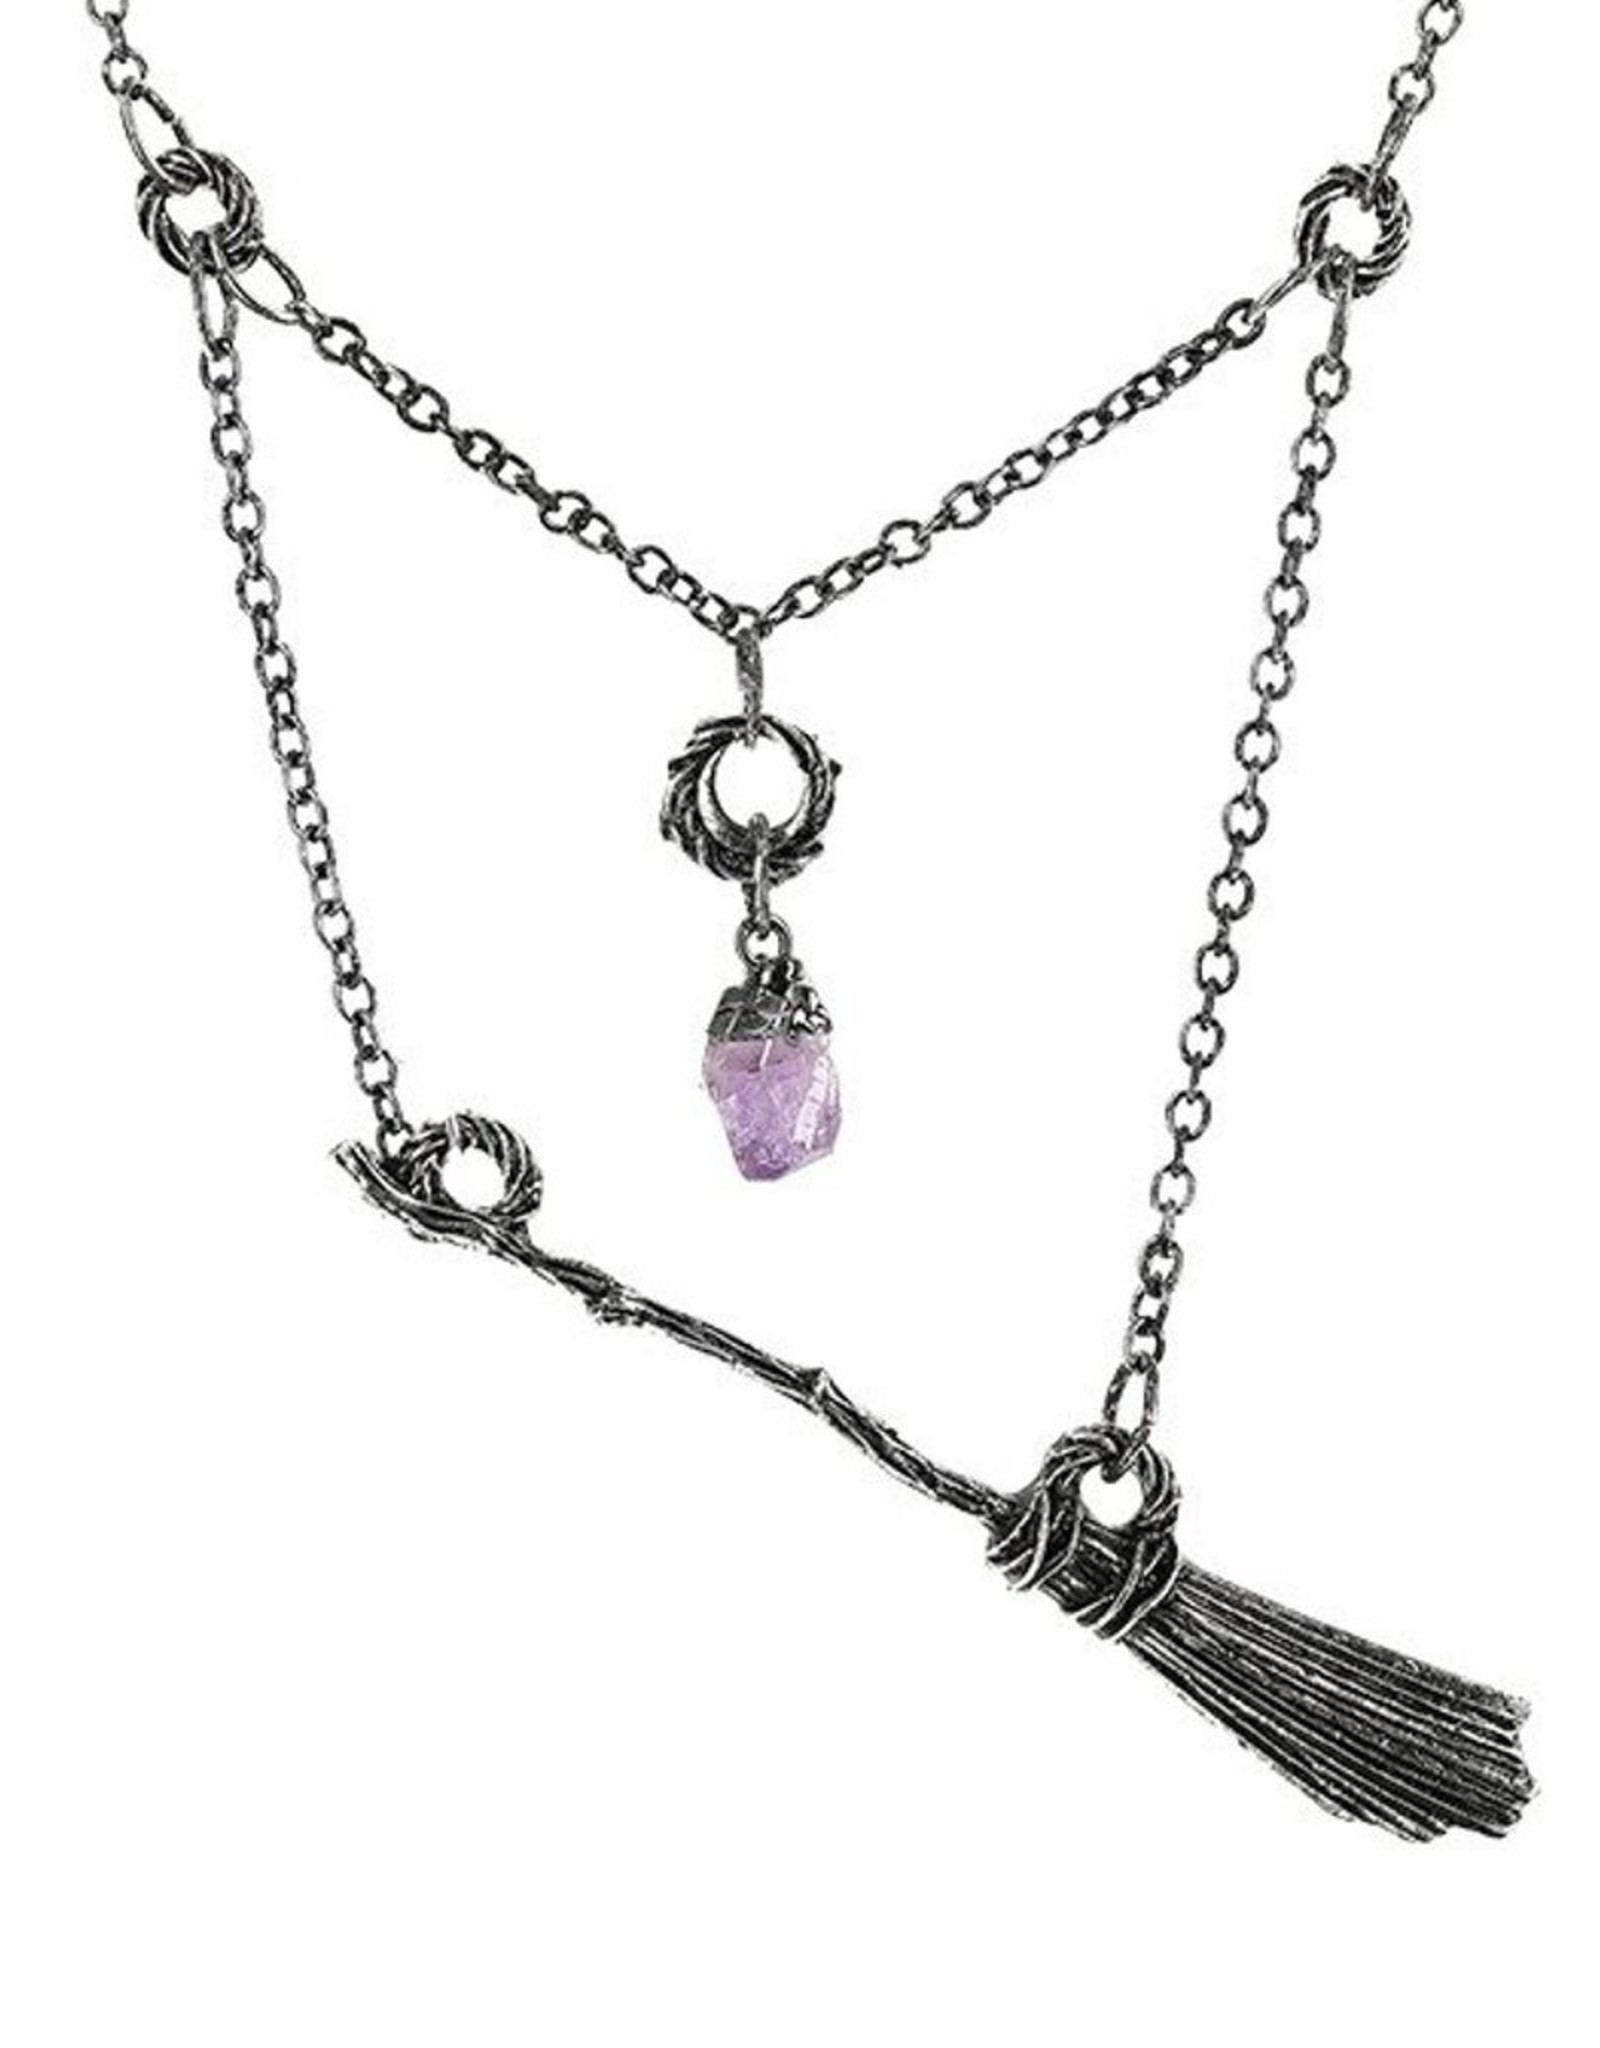 Restyle Gothic jewellery Steampunk jewellery - Necklace Witch Broomstick  - Restyle